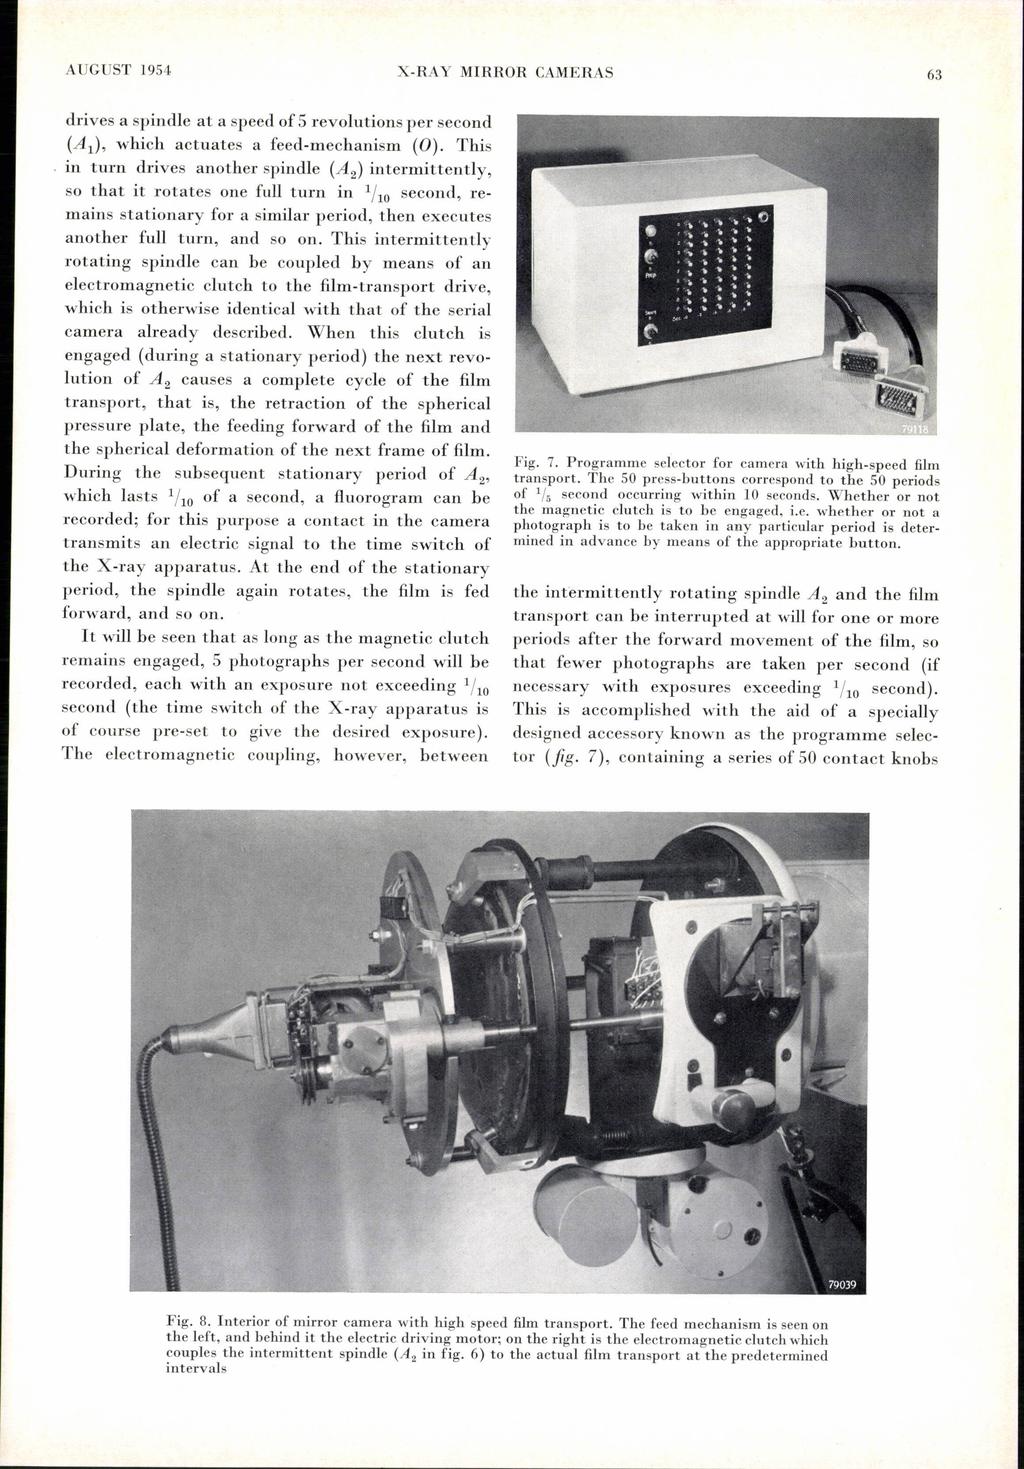 AUGUST 1954, X-RAY MIRROR drives a spindle at a speed of 5 revolutions per second (AI)' which actuates a feed-mechanism (0).